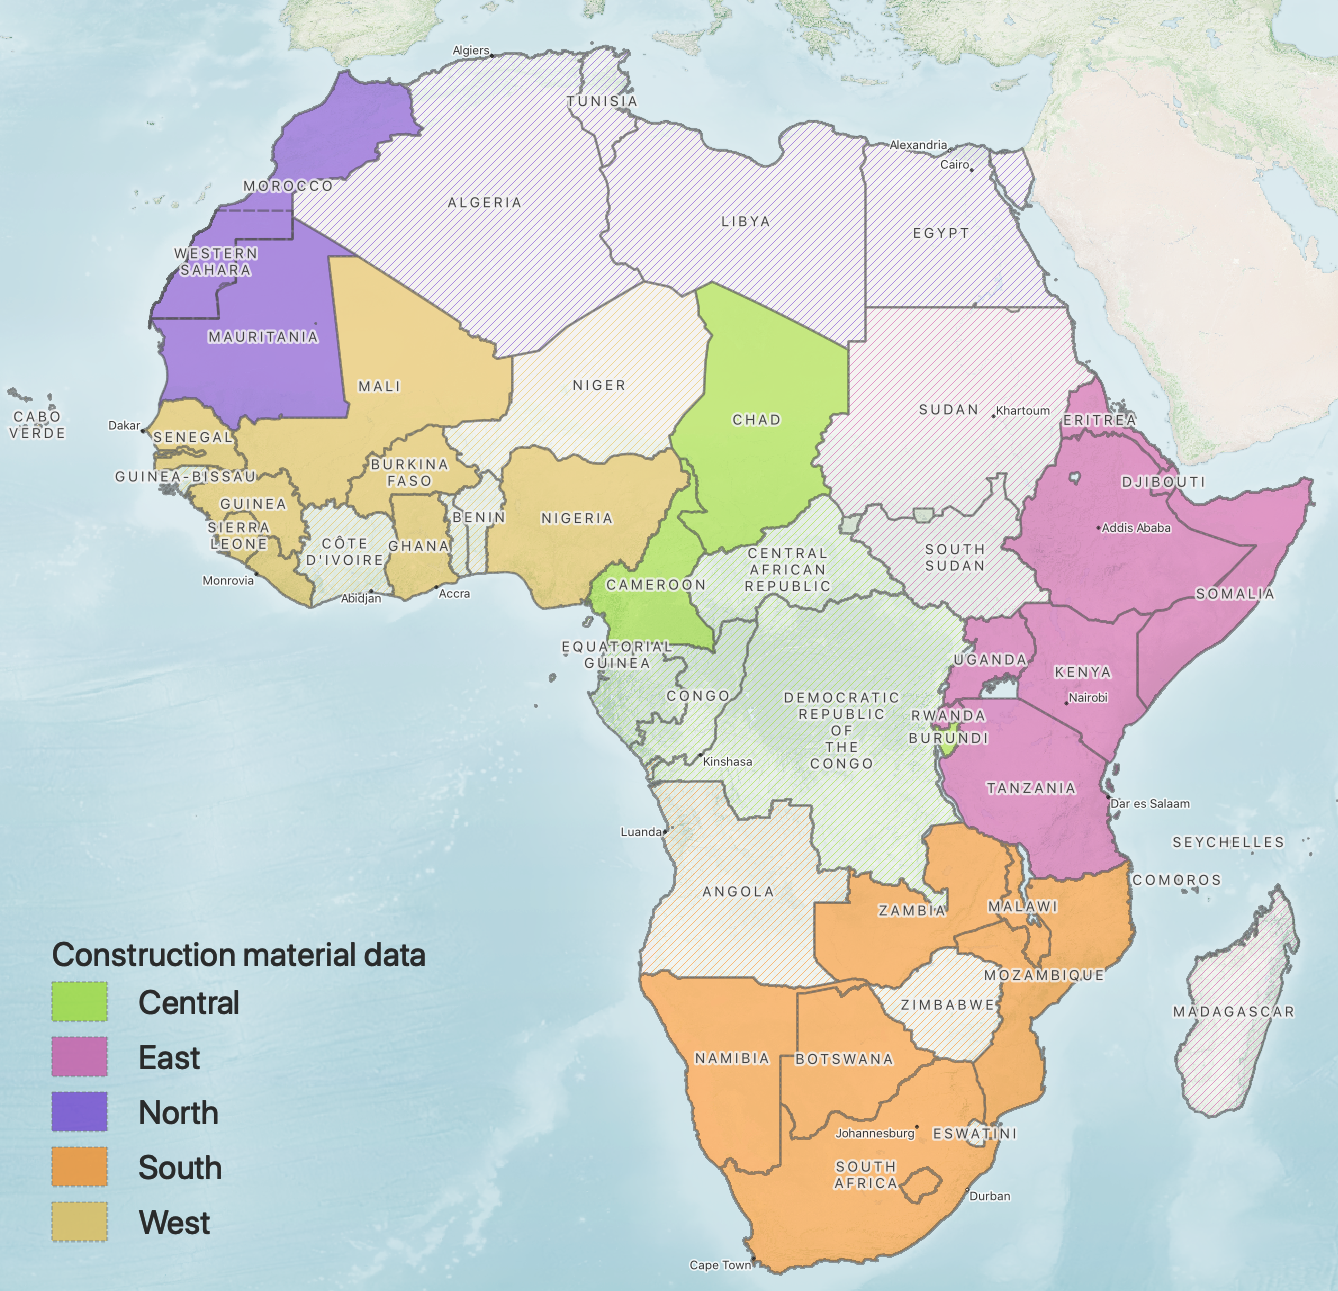 Availability of national wall material data by country and African Union region